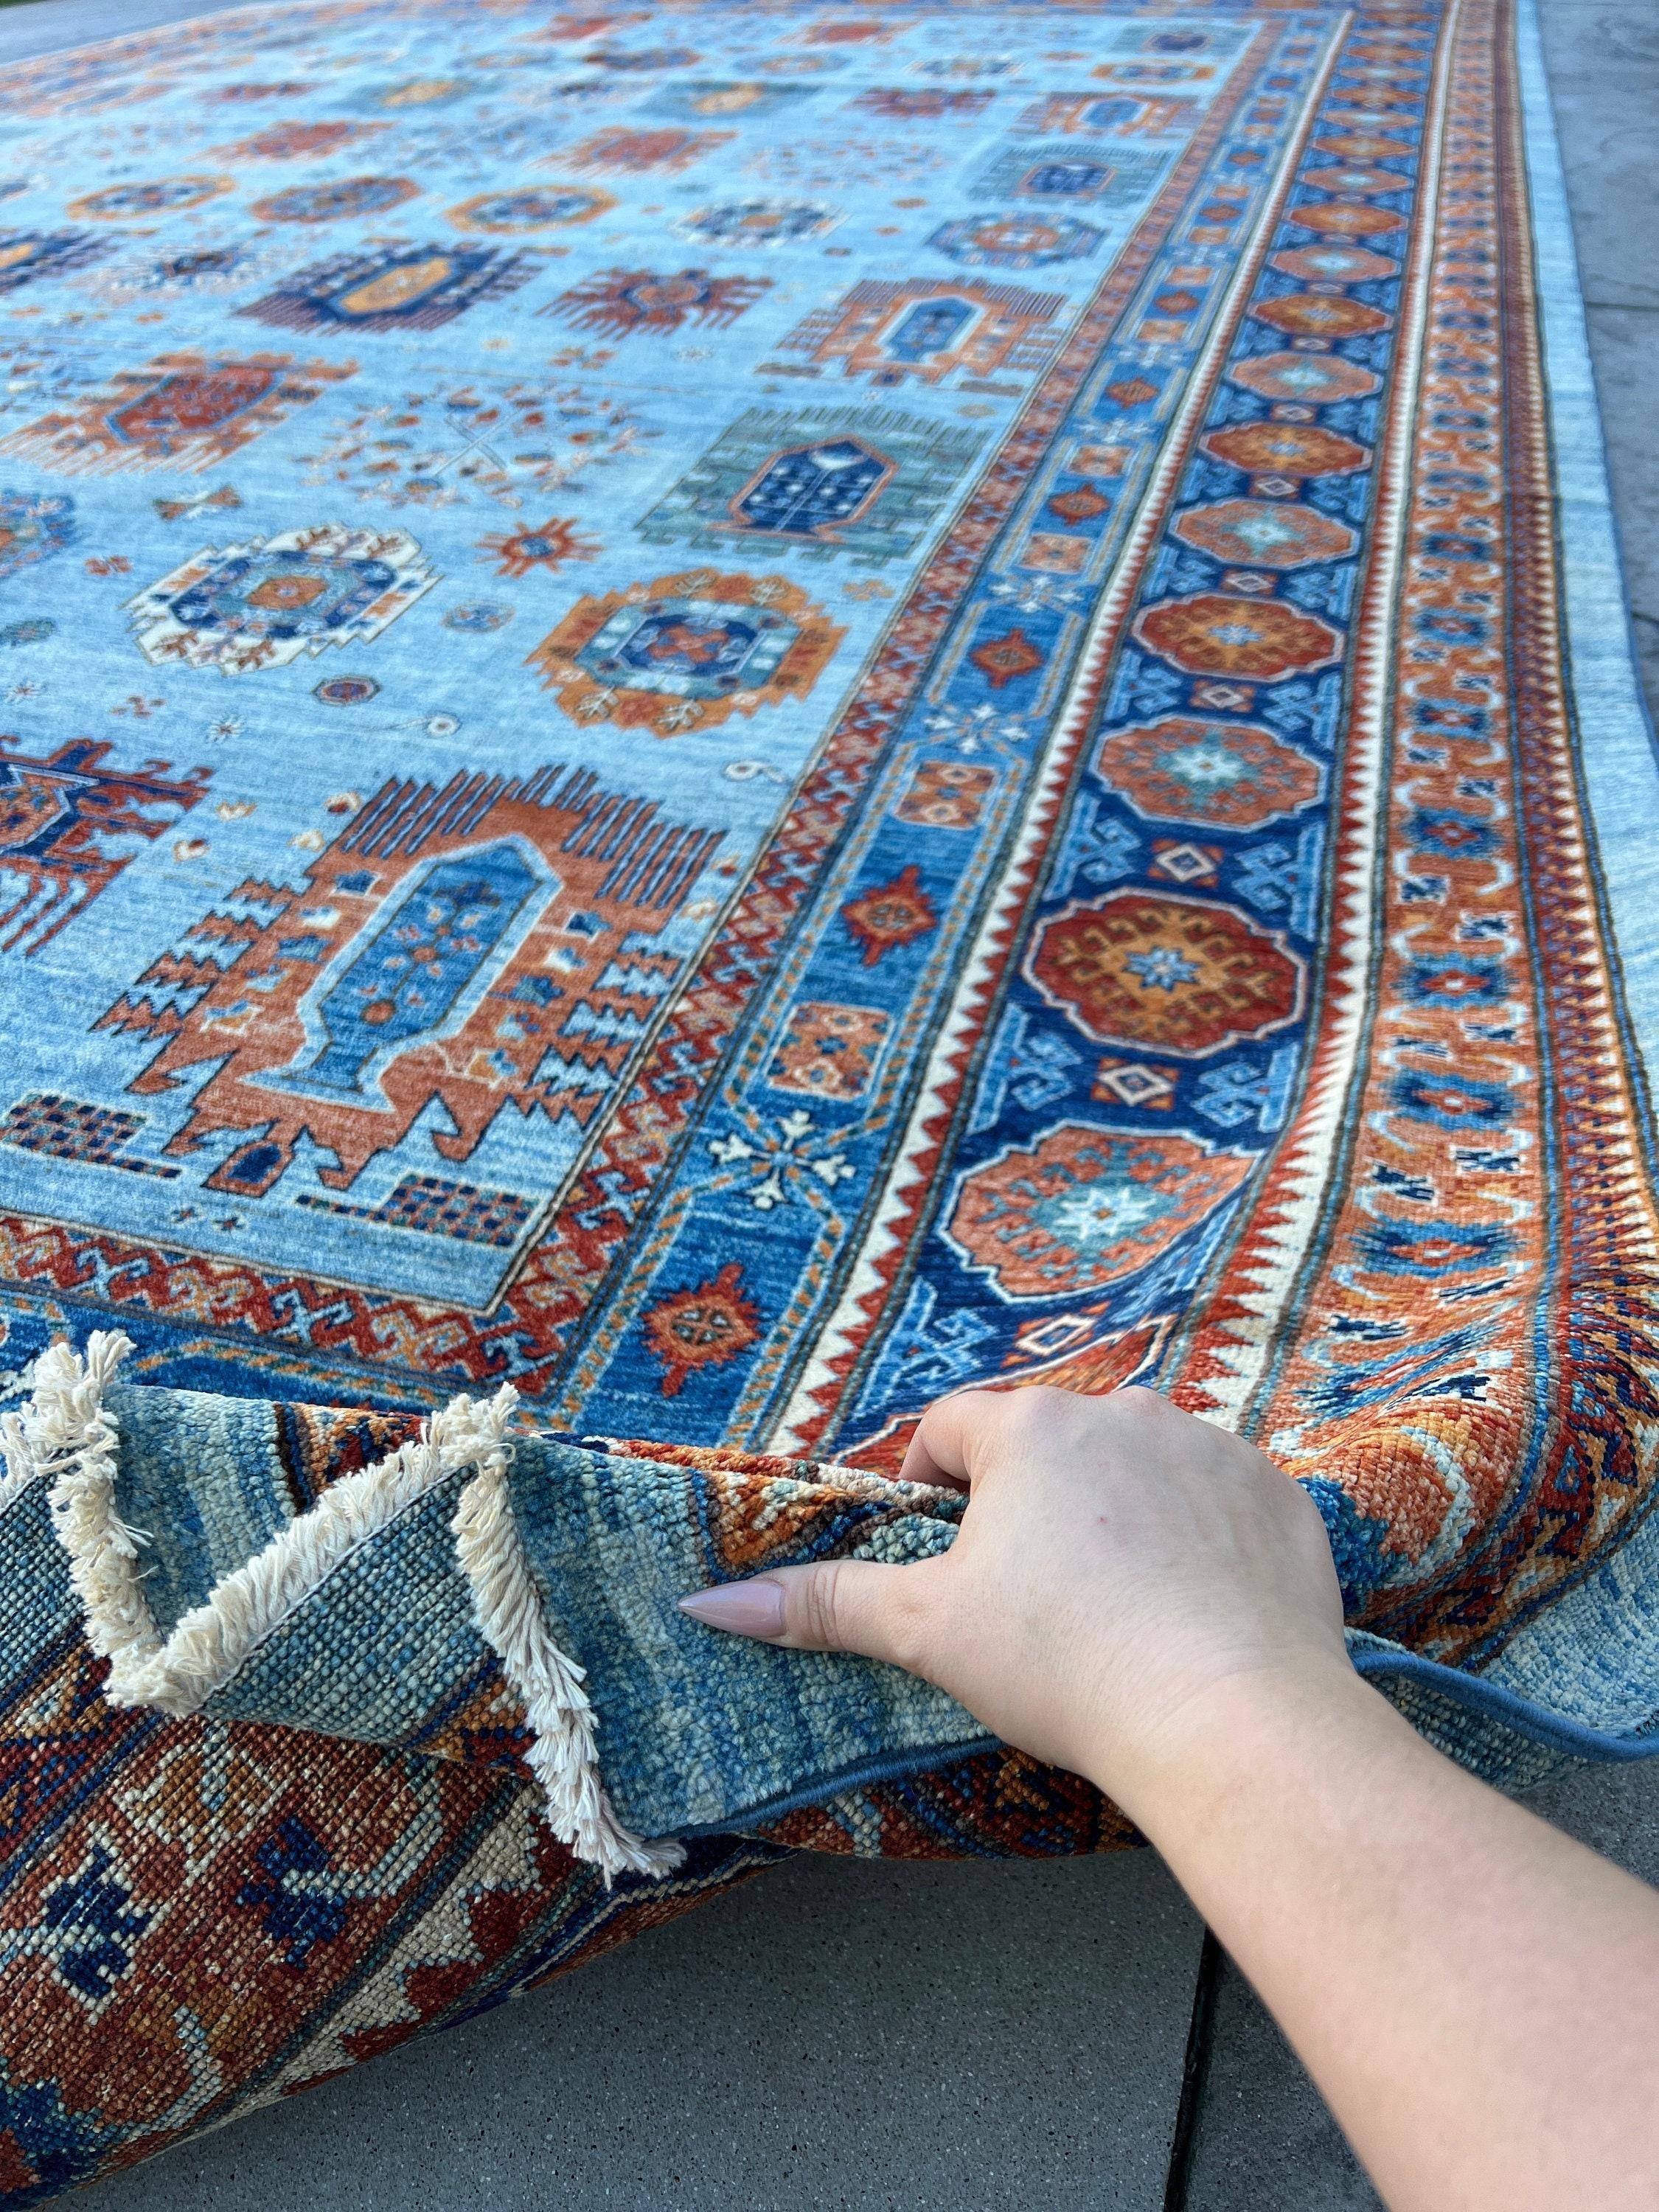 Cotton Hand-Knotted Afghan Rug Premium Hand-Spun Afghan Wool Fair Trade For Sale